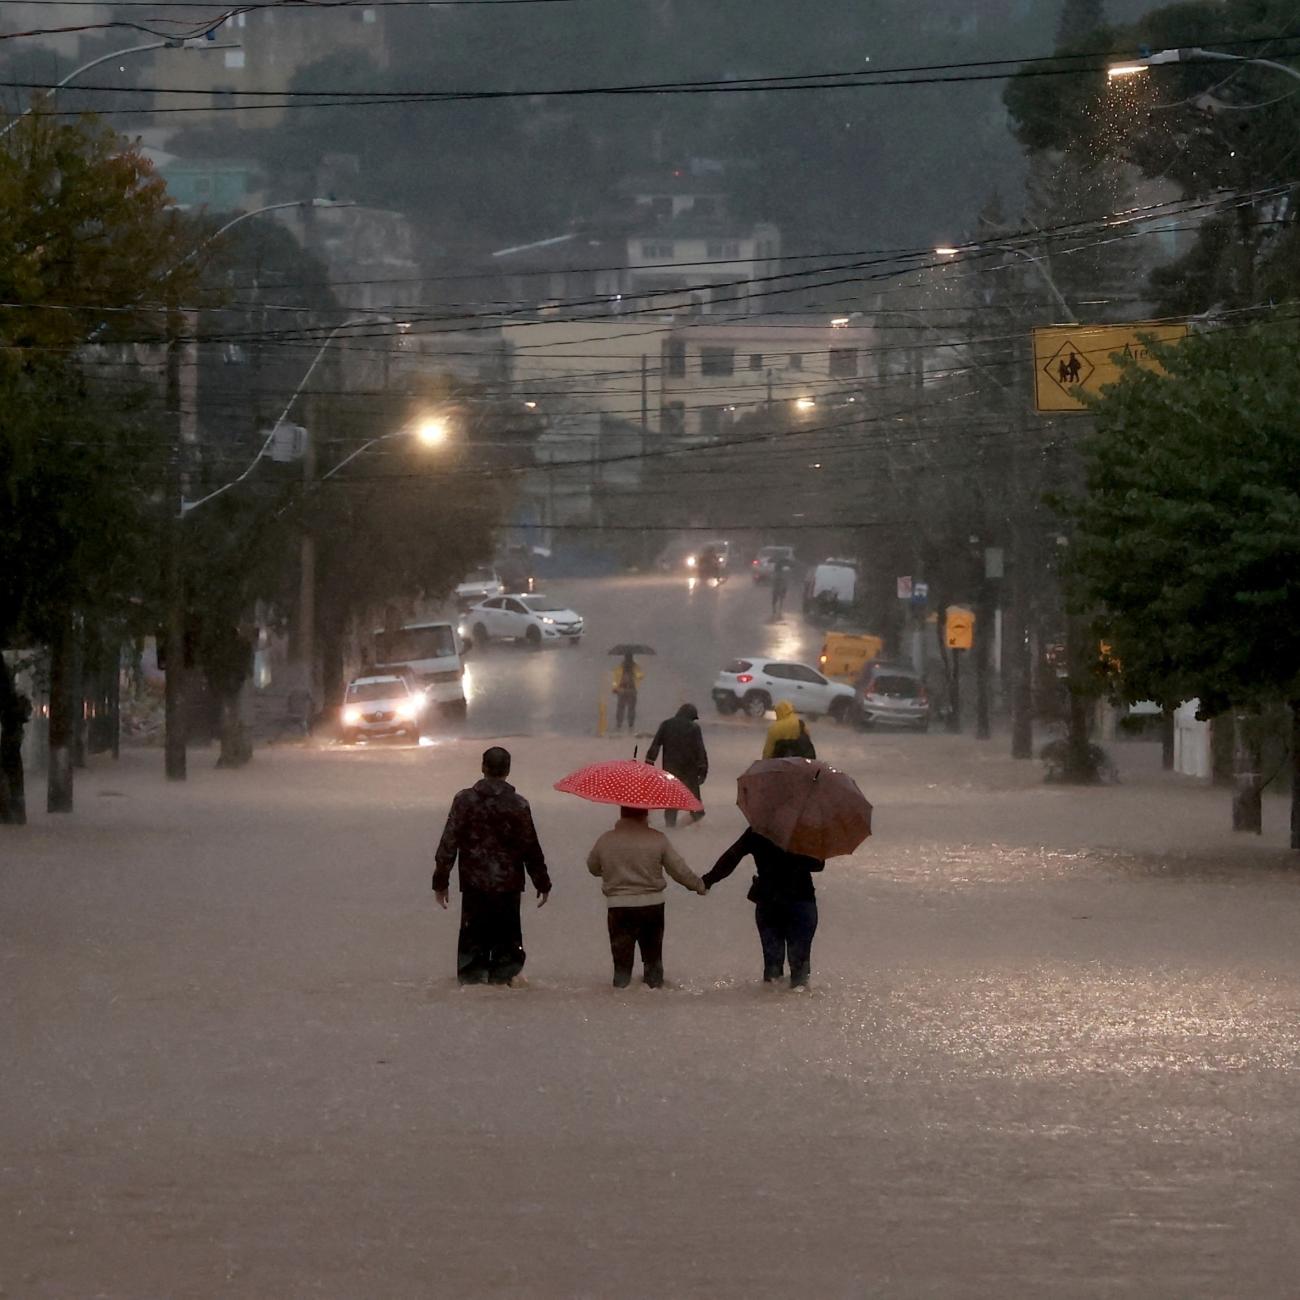 People walk in a flooded area in the Cavalhada neighborhood after heavy rains.